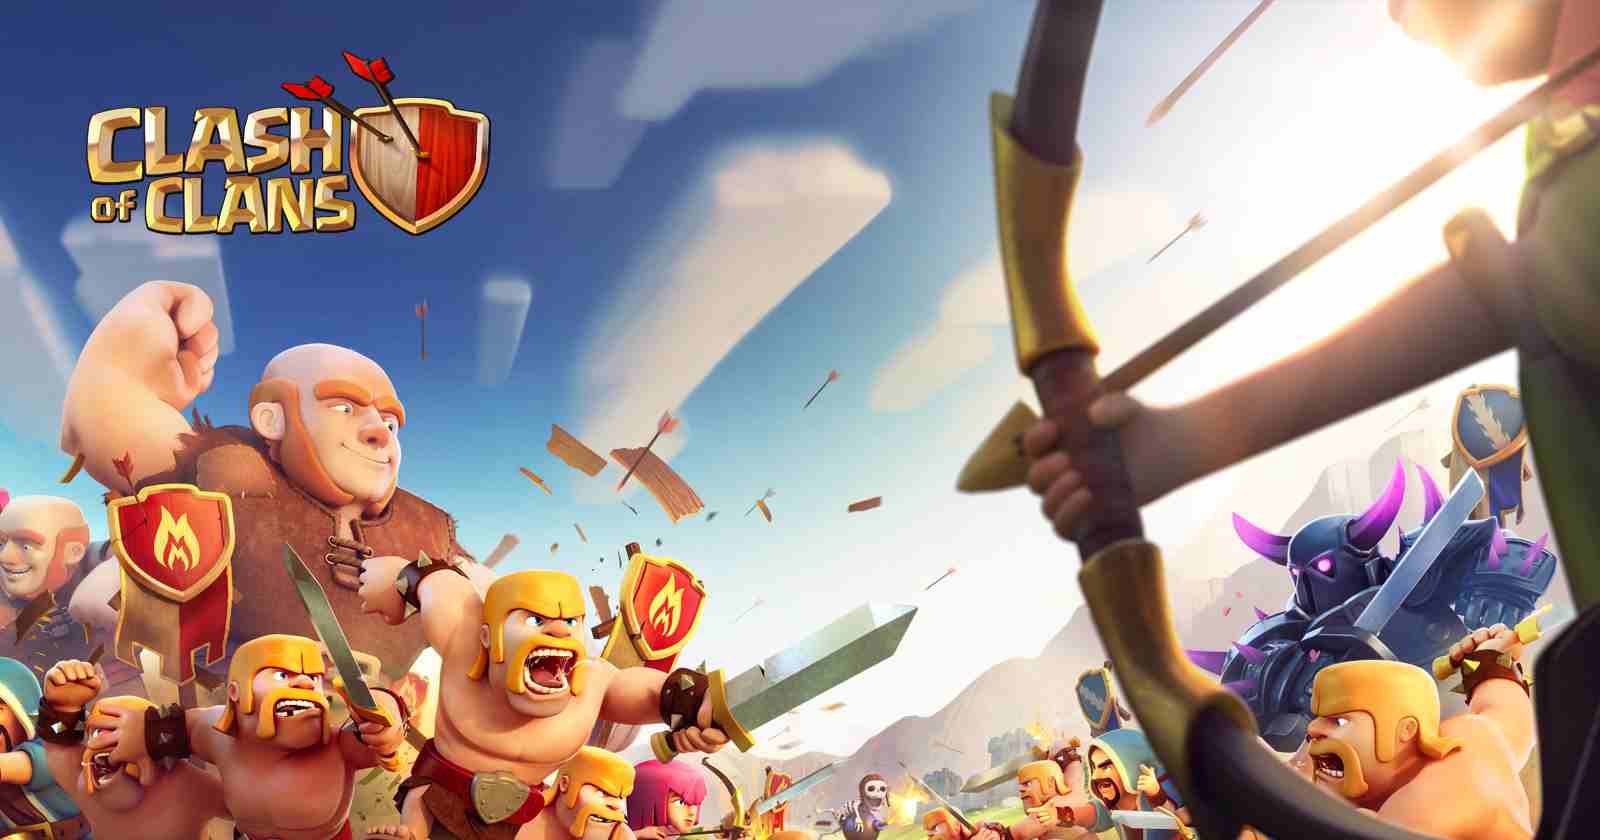 Clash of Clans 16.253.20 APK MOD [Menu LMH, Huge Amount Of Money everything troops gold gems oil]